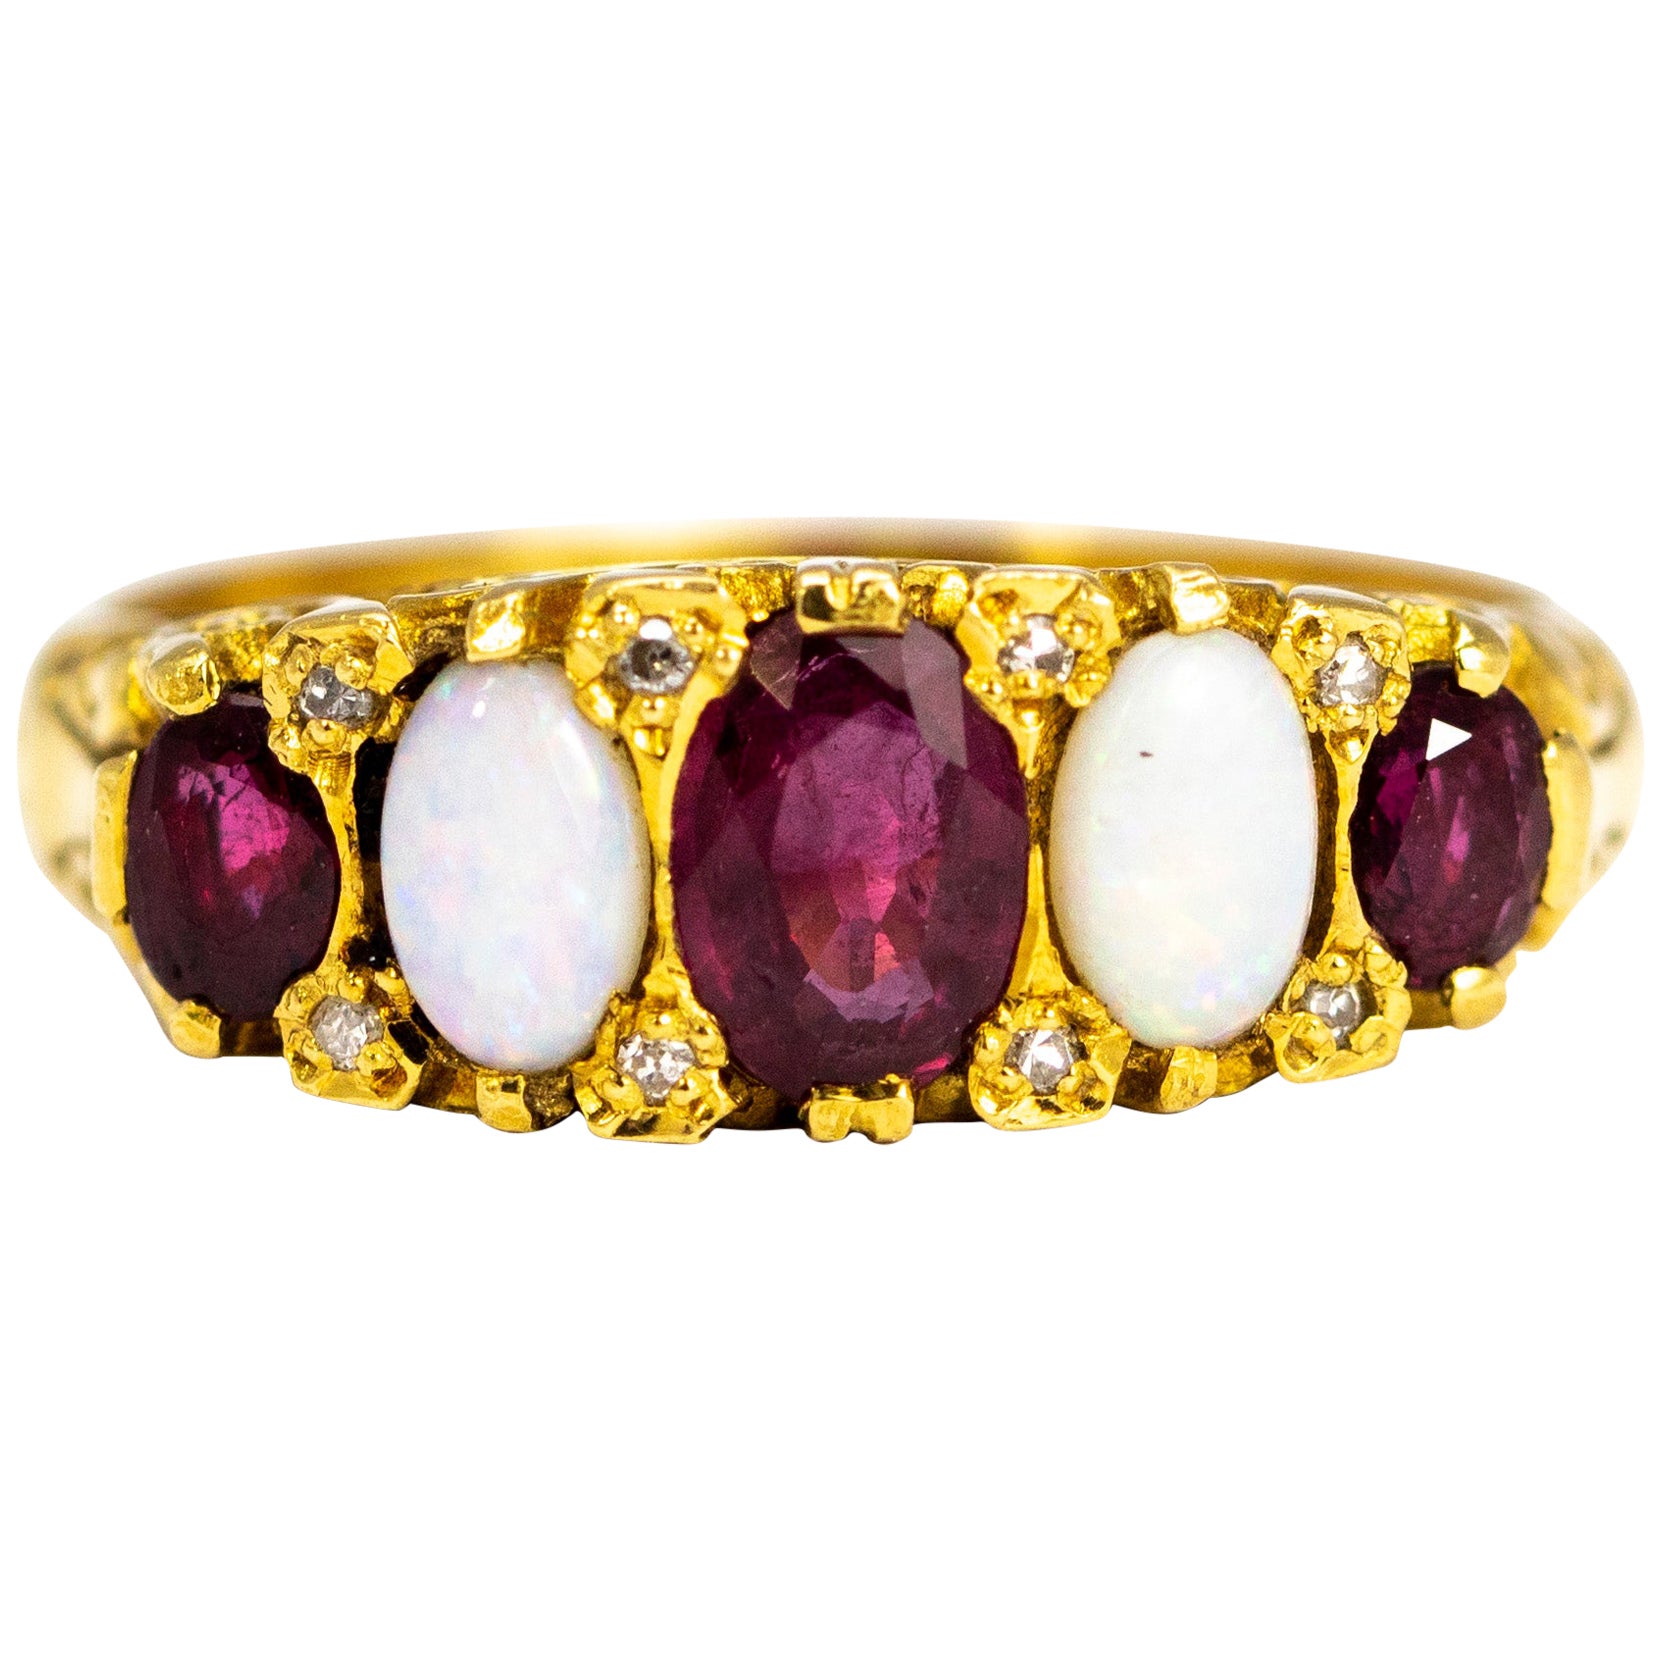 Edwardian Opal and Ruby 9 Carat Gold Five-Stone Ring at 1stDibs